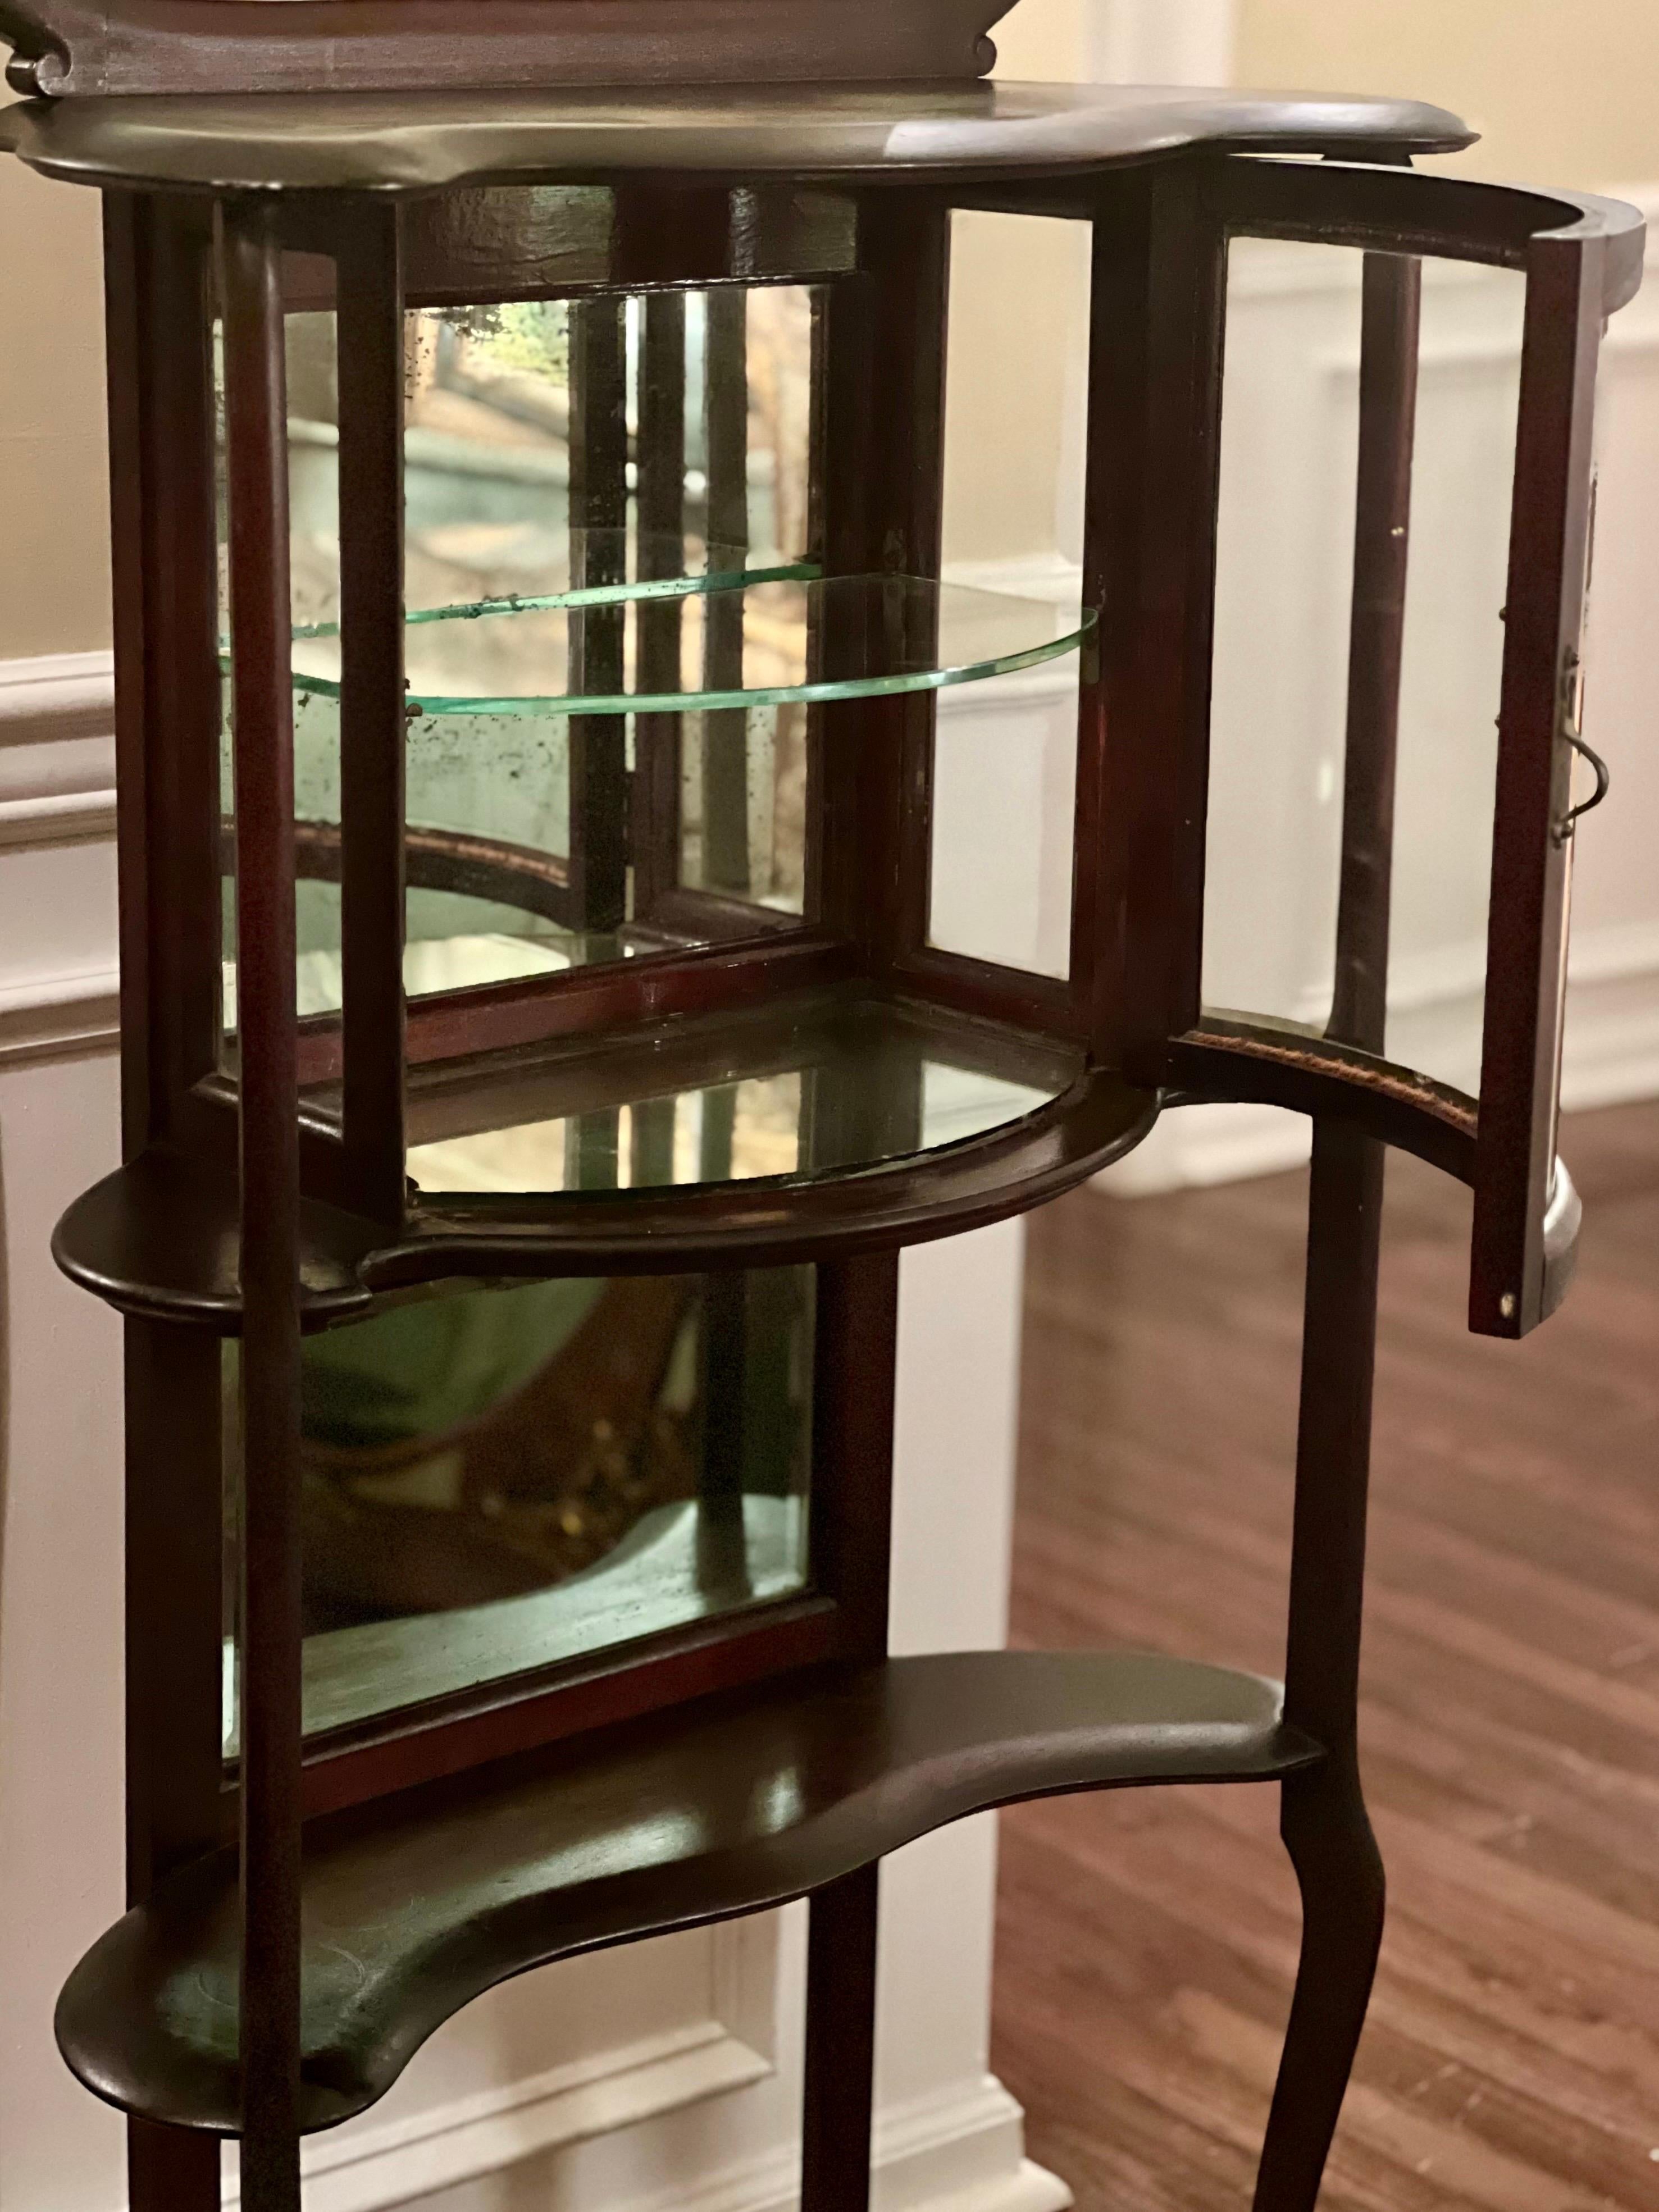 Antique American Art Nouveau Small Mirrored Étagère with Curio Cabinet In Good Condition For Sale In Doylestown, PA